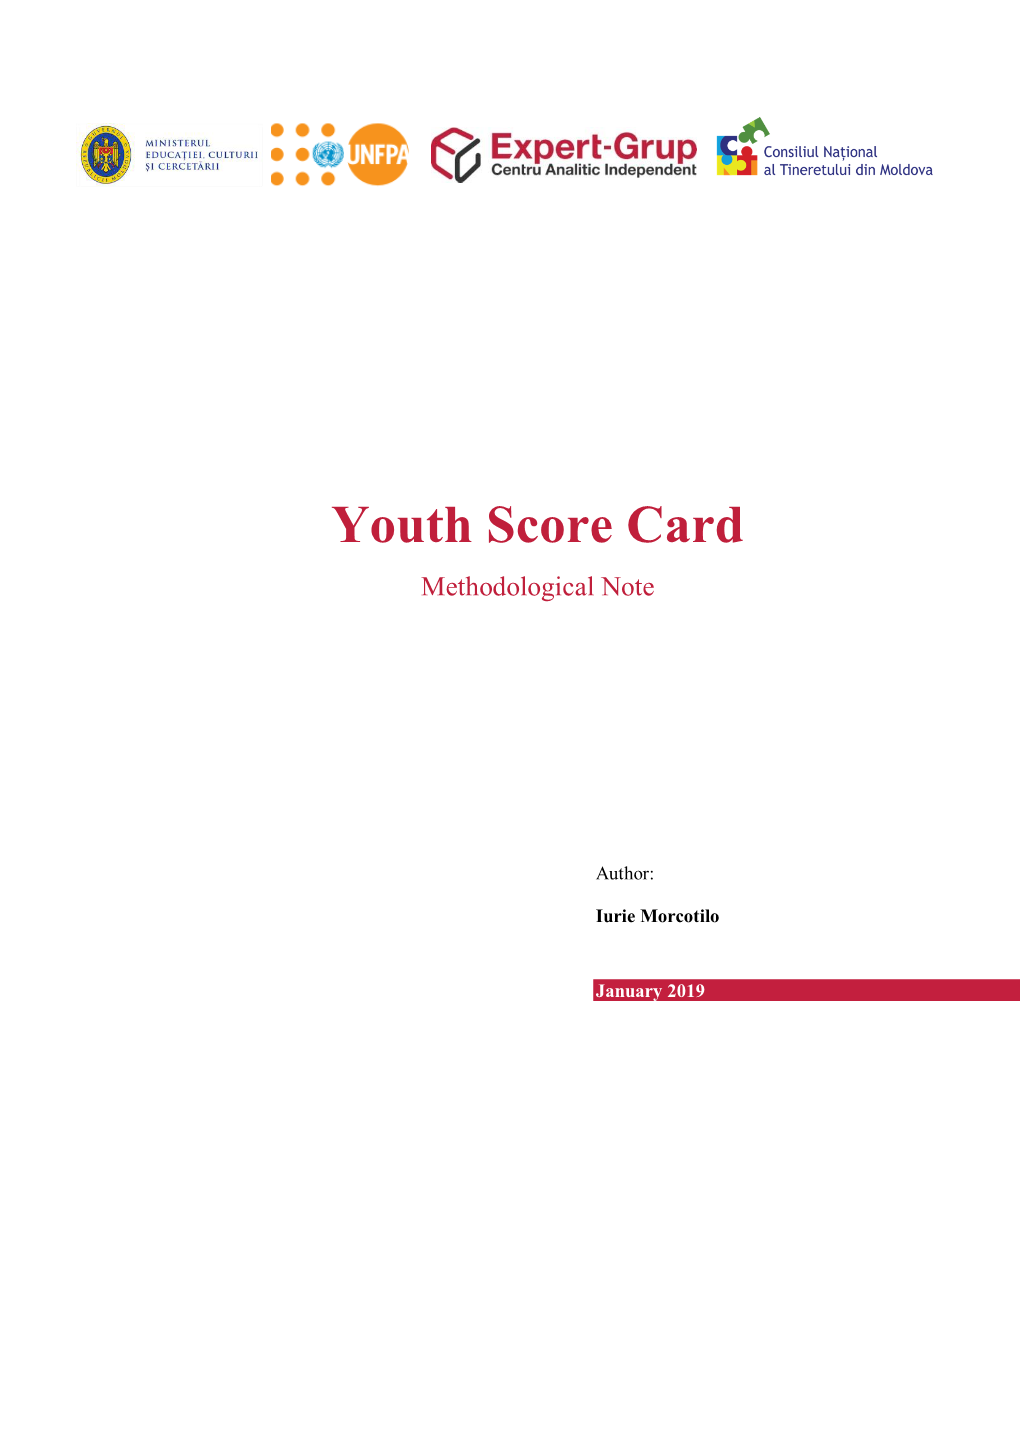 Youth Score Card Methodological Note